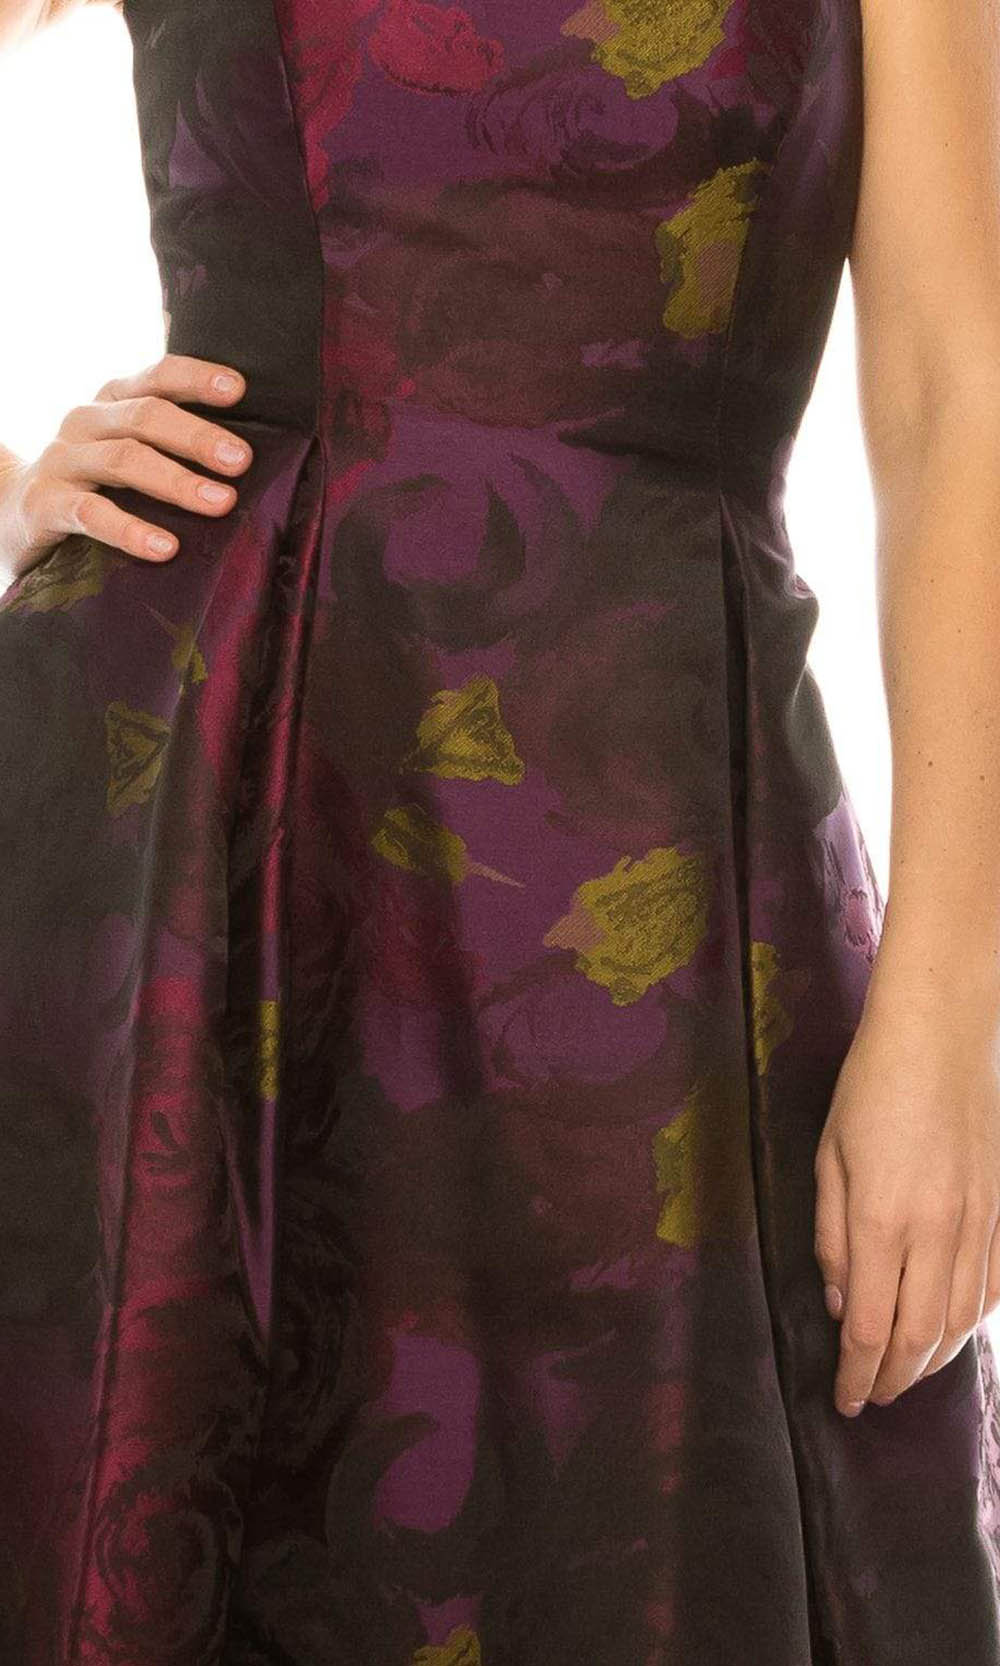 adrianna papell floral dress